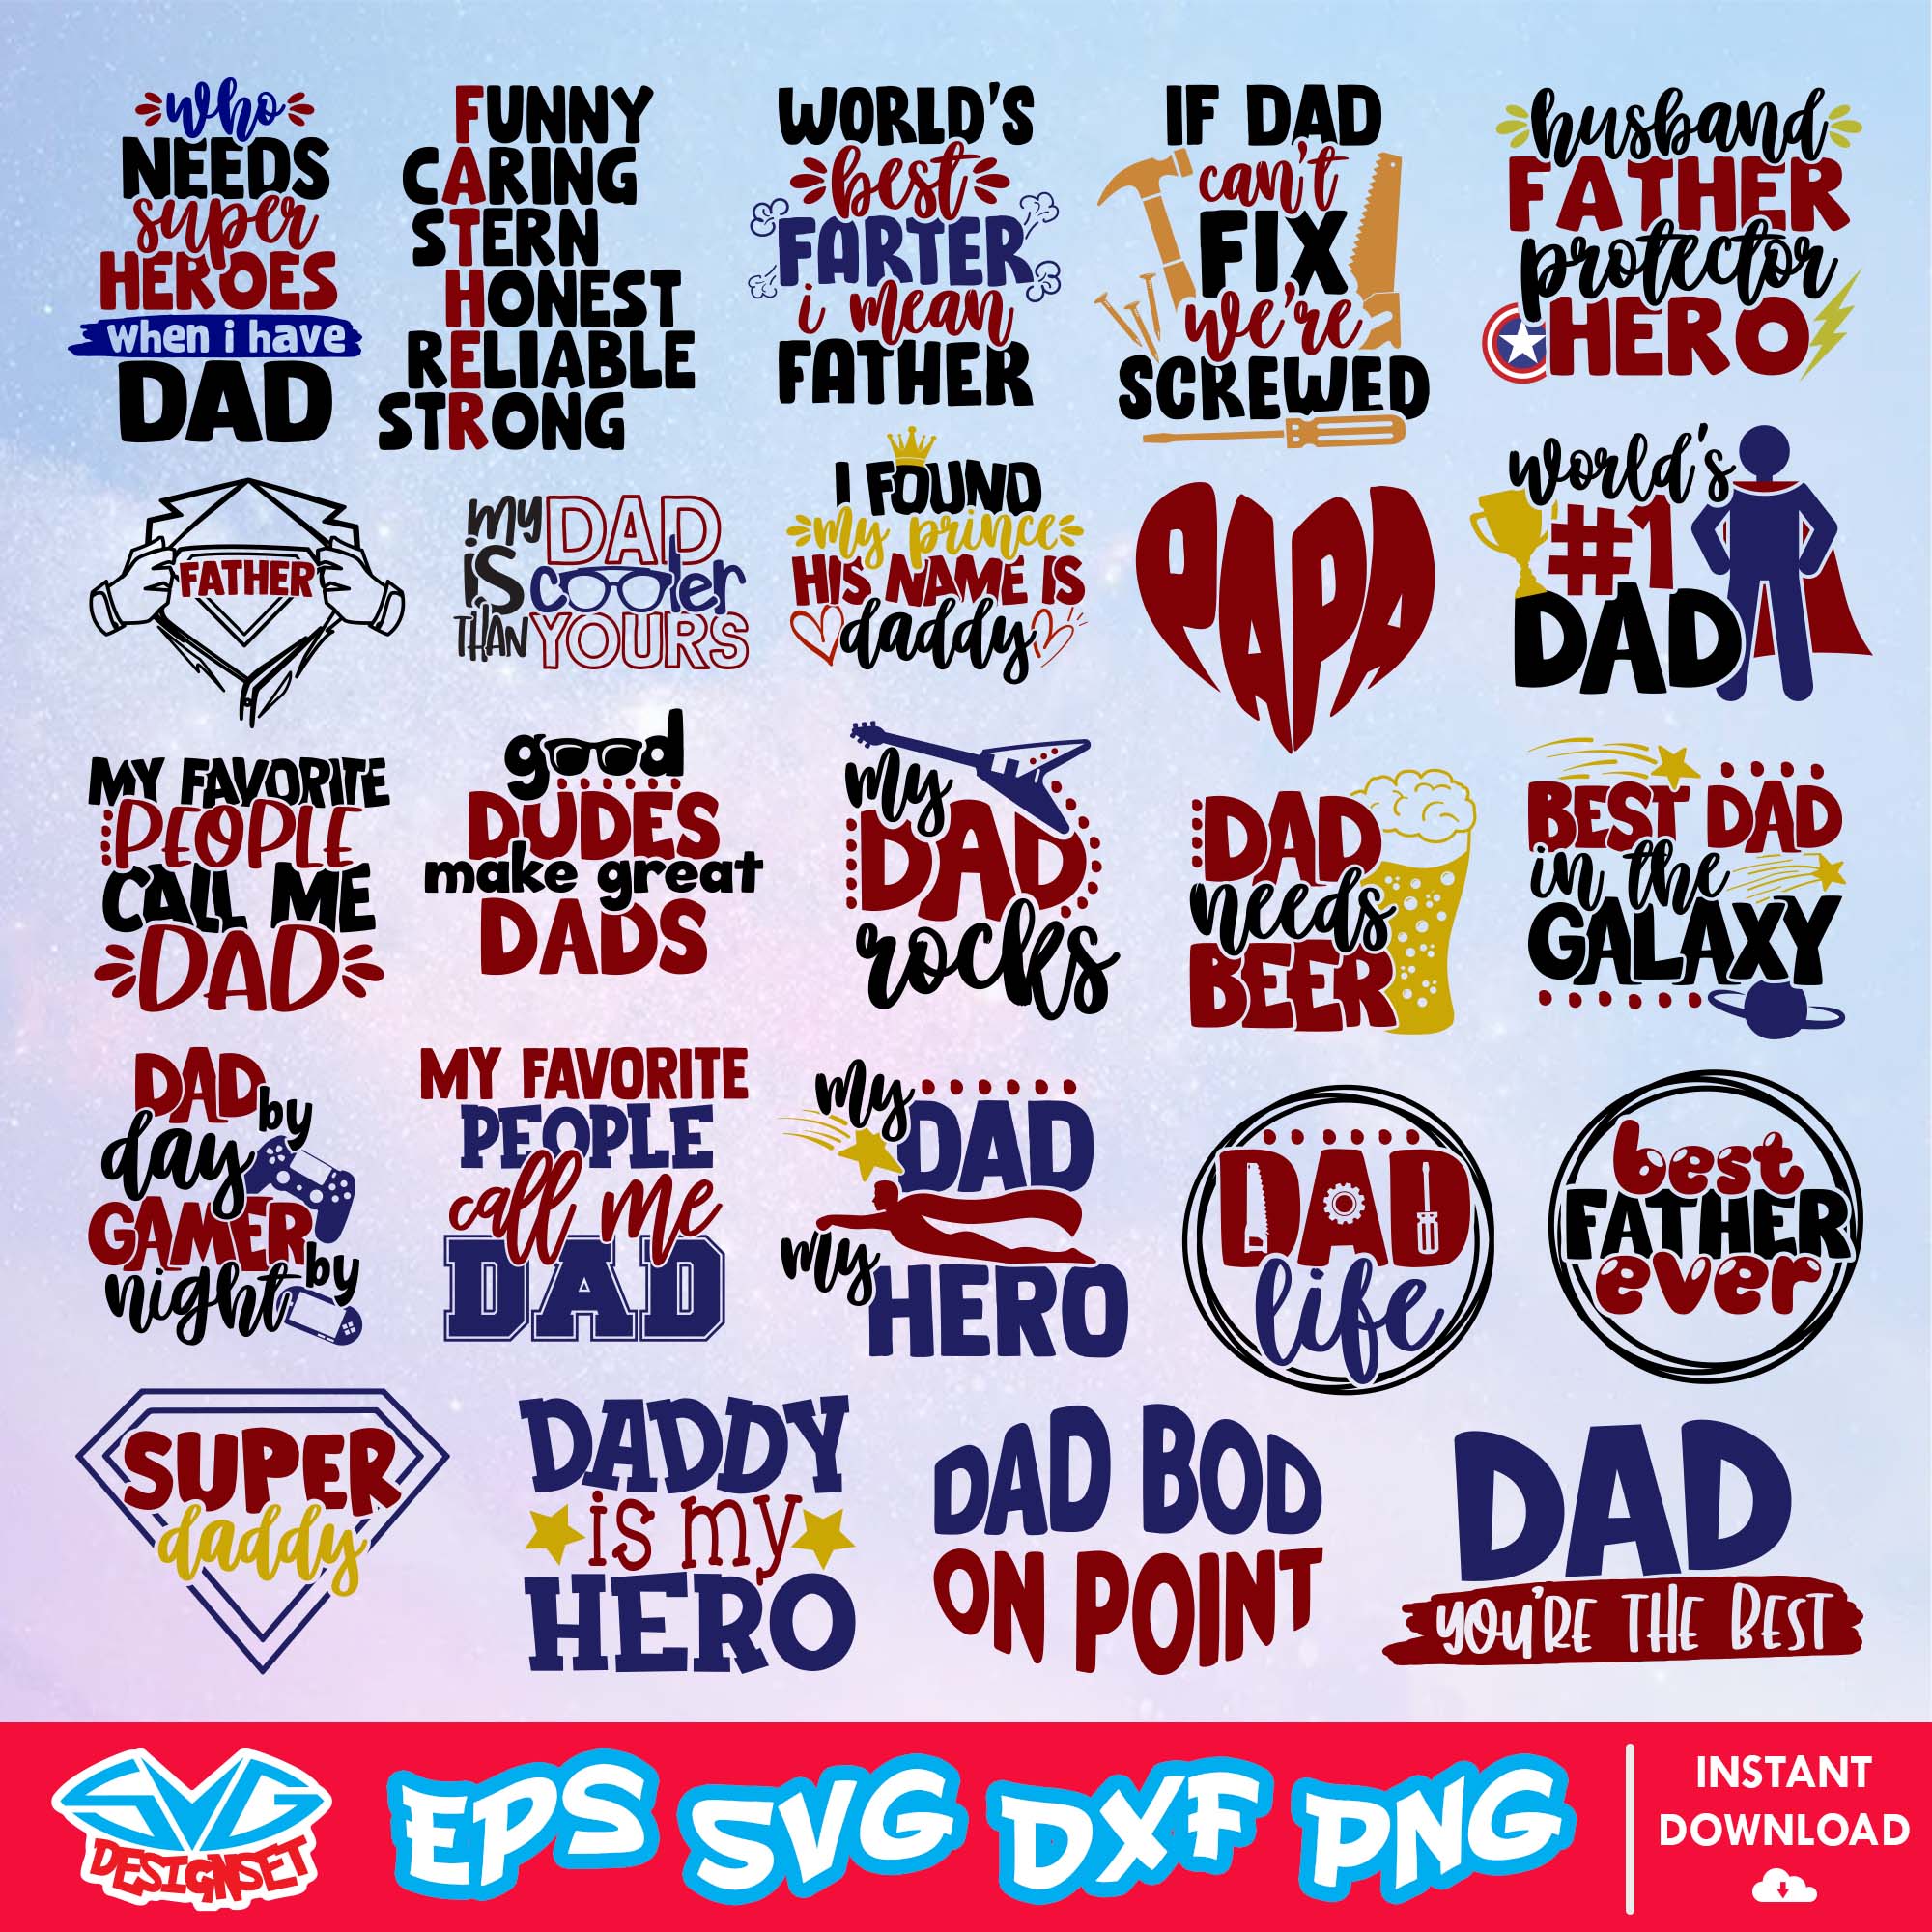 Fathers Day Bundle Svg, Dxf, Eps, Png, Clipart, Silhouette, and Cut files for Cricut & Silhouette Cameo - SVGDesignSet